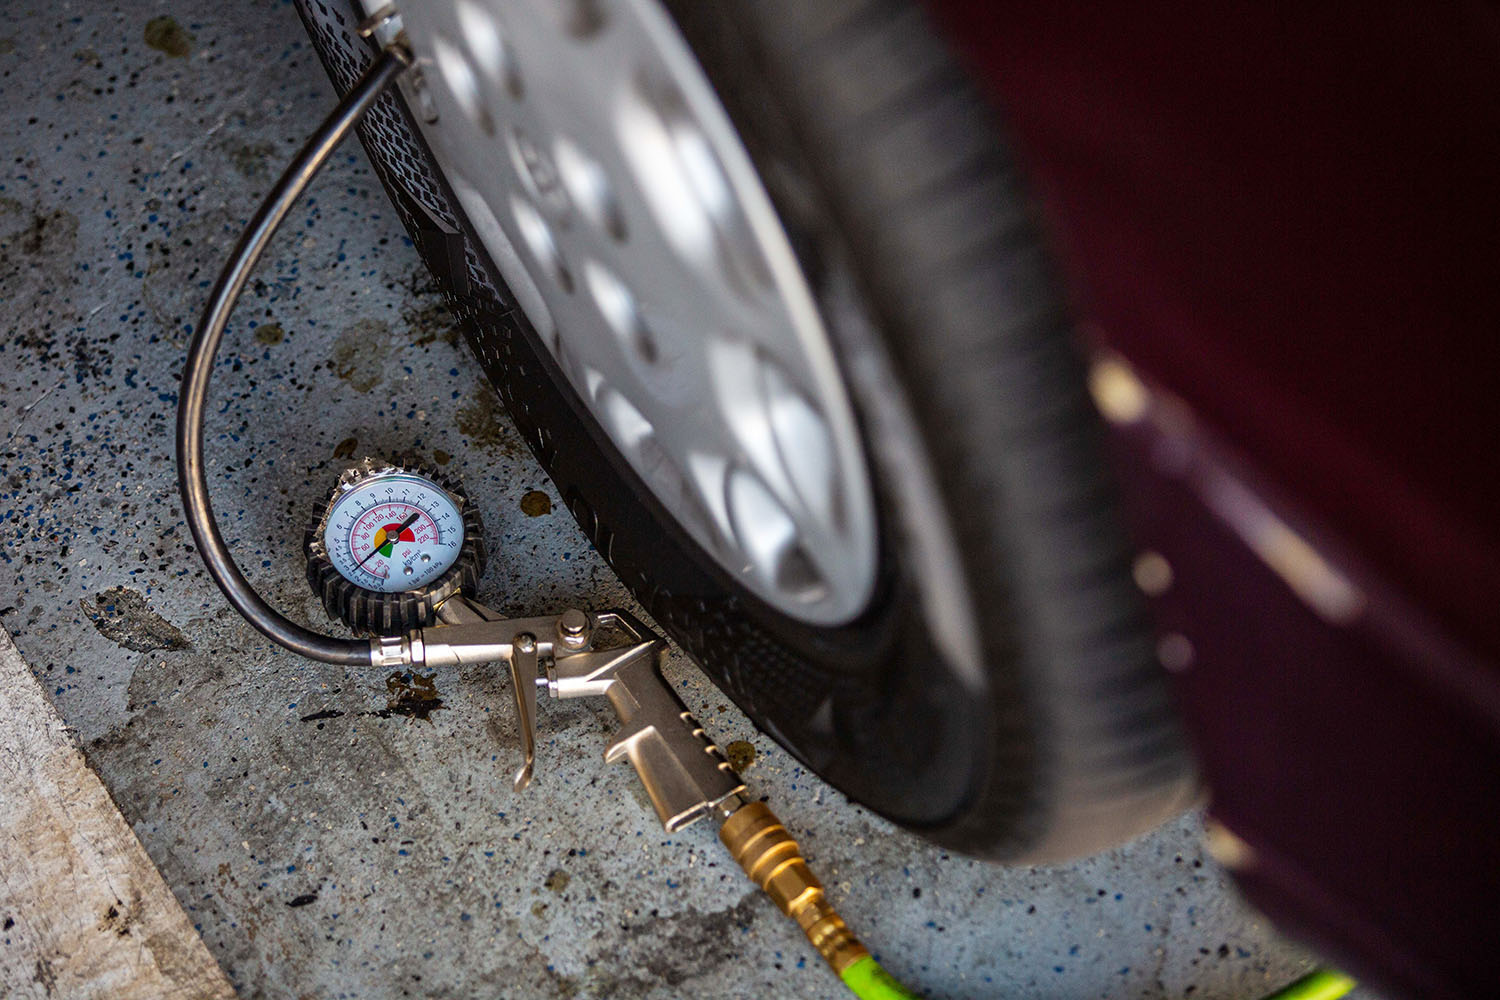 Tire-pressure gauge attached to car tire.